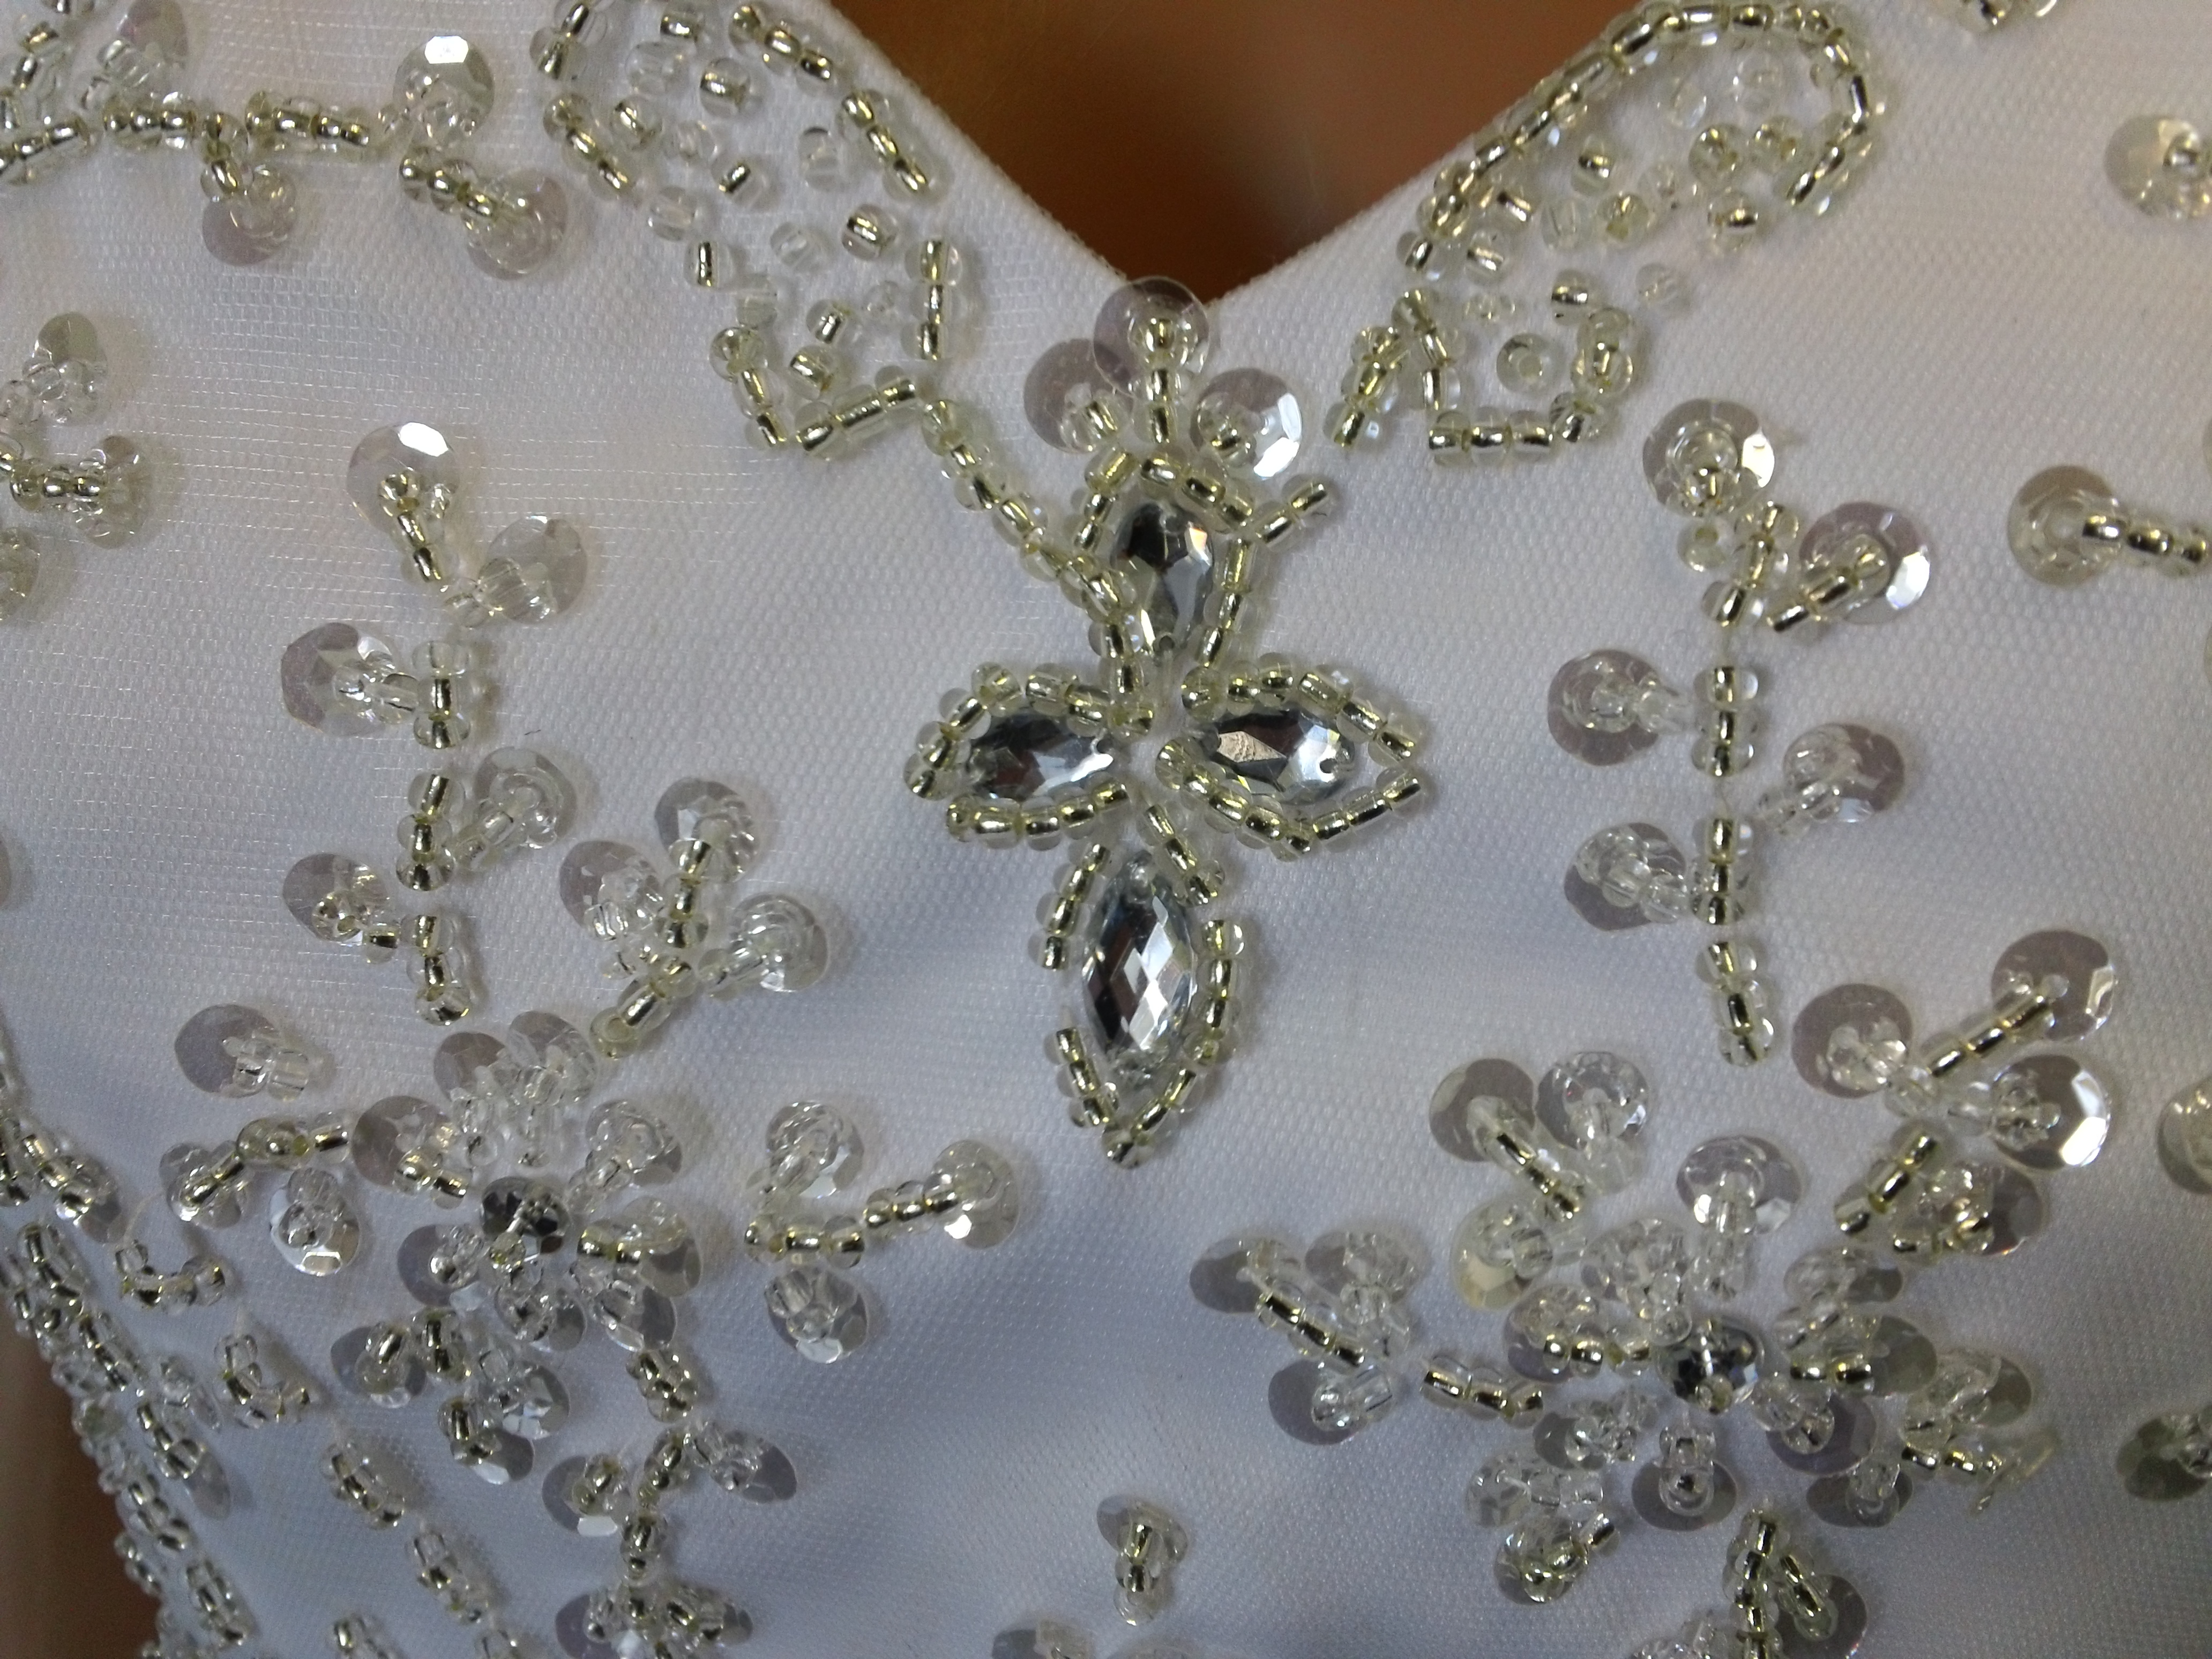 Beaded Embroidery Patterns Beaded Wedding Dress